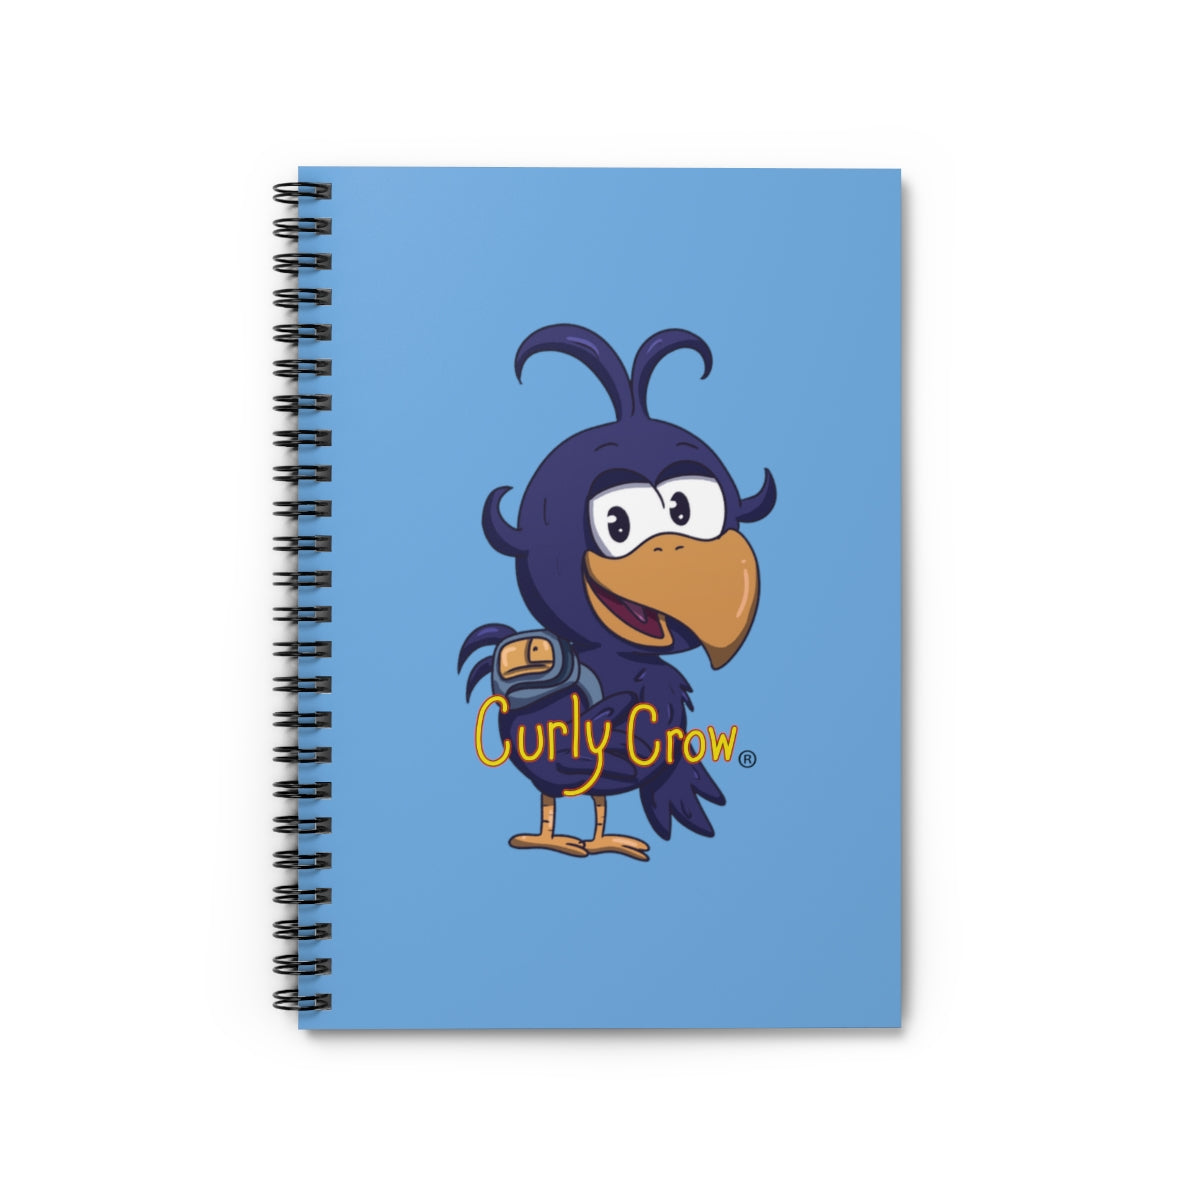 Curly Crow Spiral Notebook - Lazy Boy